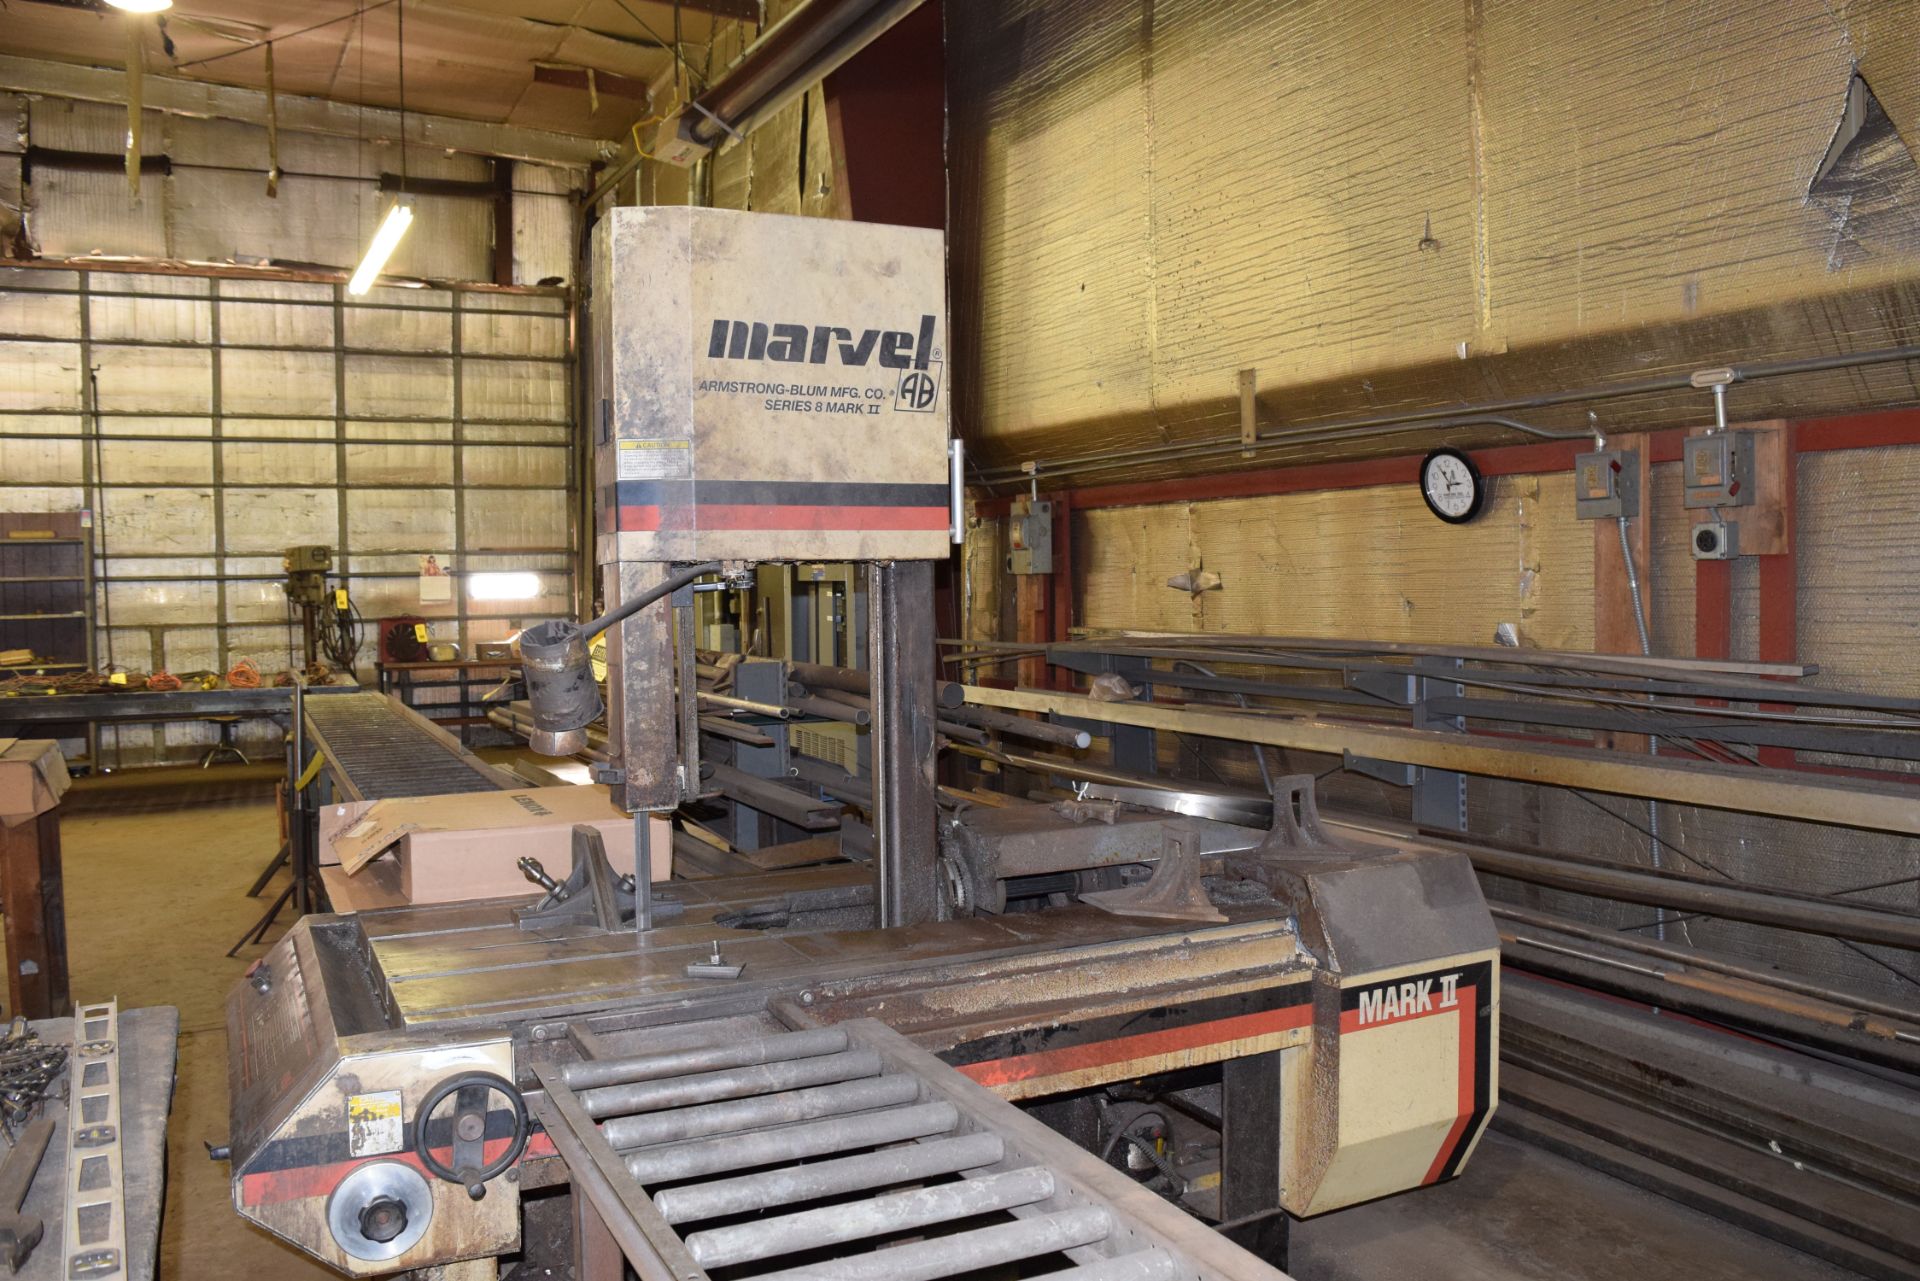 Marvel Series 8 Mark II Vertical Band Saw, SN: 829175, 230 Volt, 3-Phase with 20' Long X 16'' - Image 2 of 2